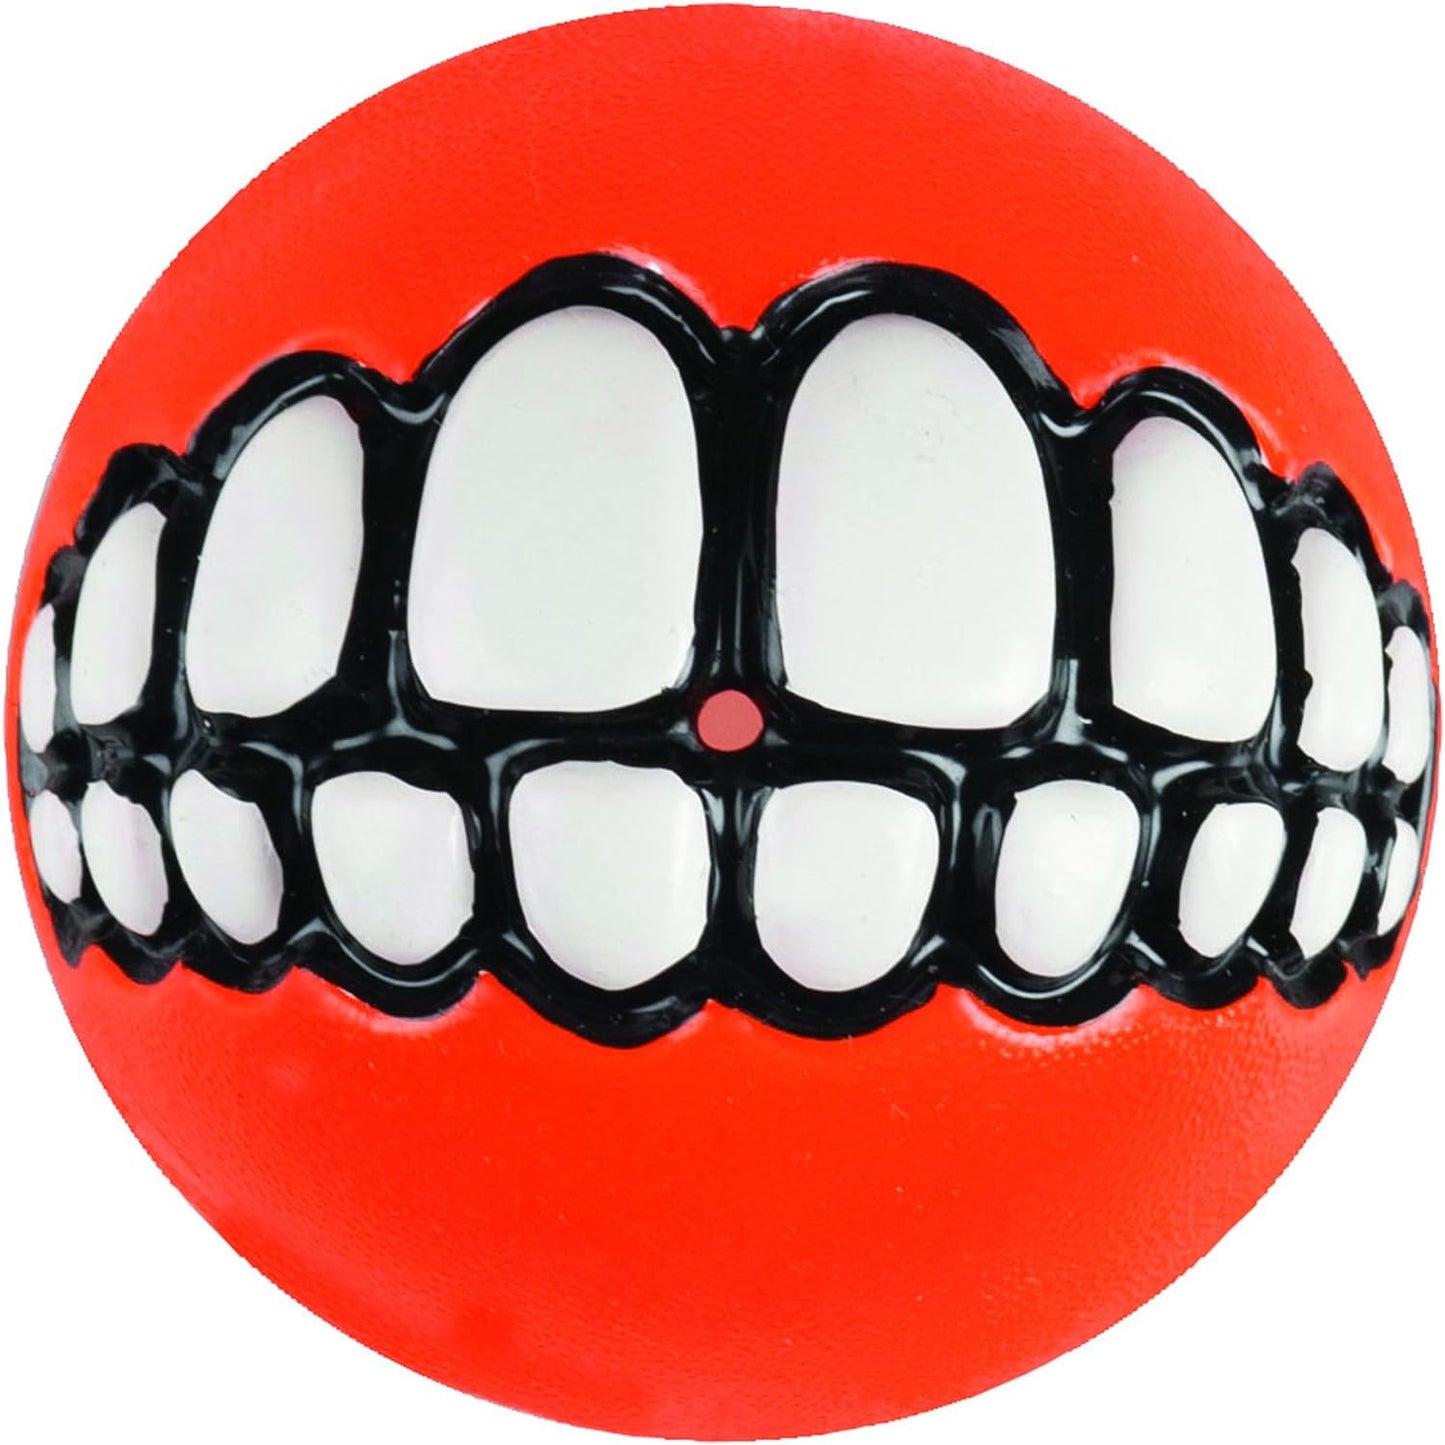 ROGZ by KONG - Grinz - Dog Chew and Fetch Ball - for Small Dogs